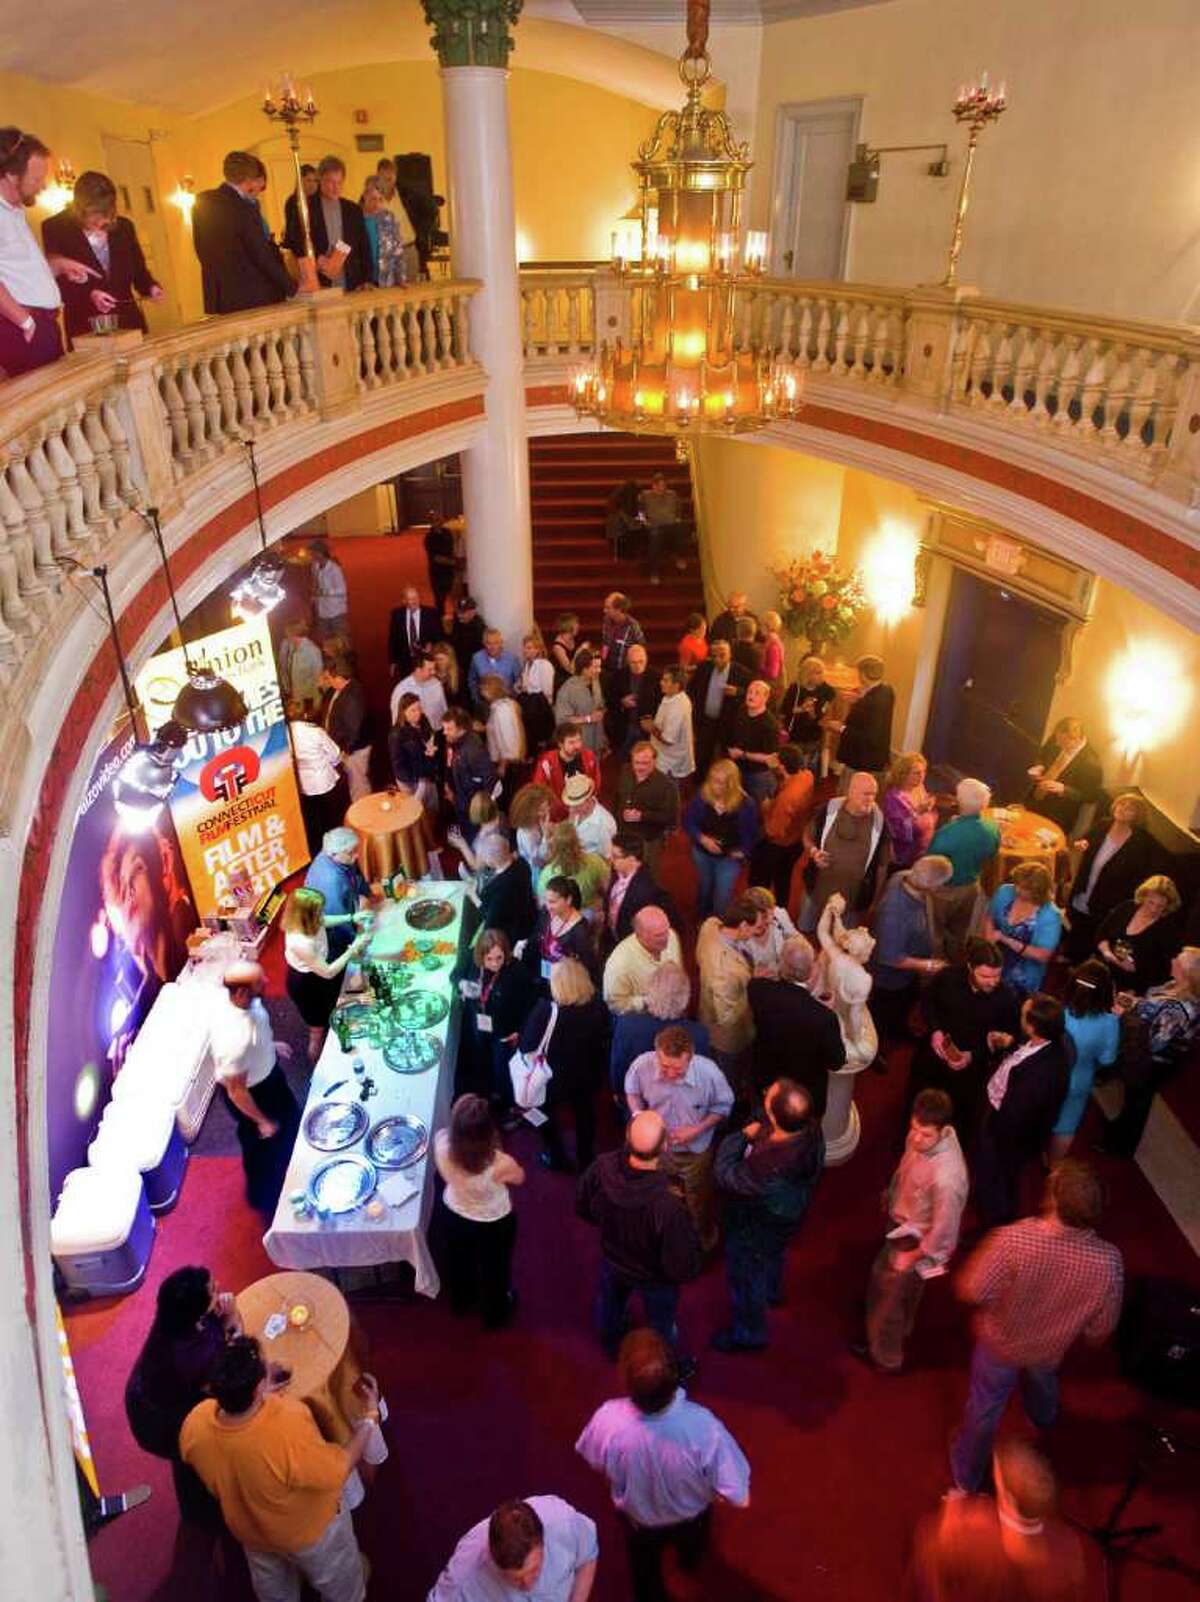 Folks gather in the lobby of the Palace Theater in Danbury prior to the start of the Connecticut Film Festival's showing of the documentary "The Wrecking Crew." Tuesday, May 4, 2010